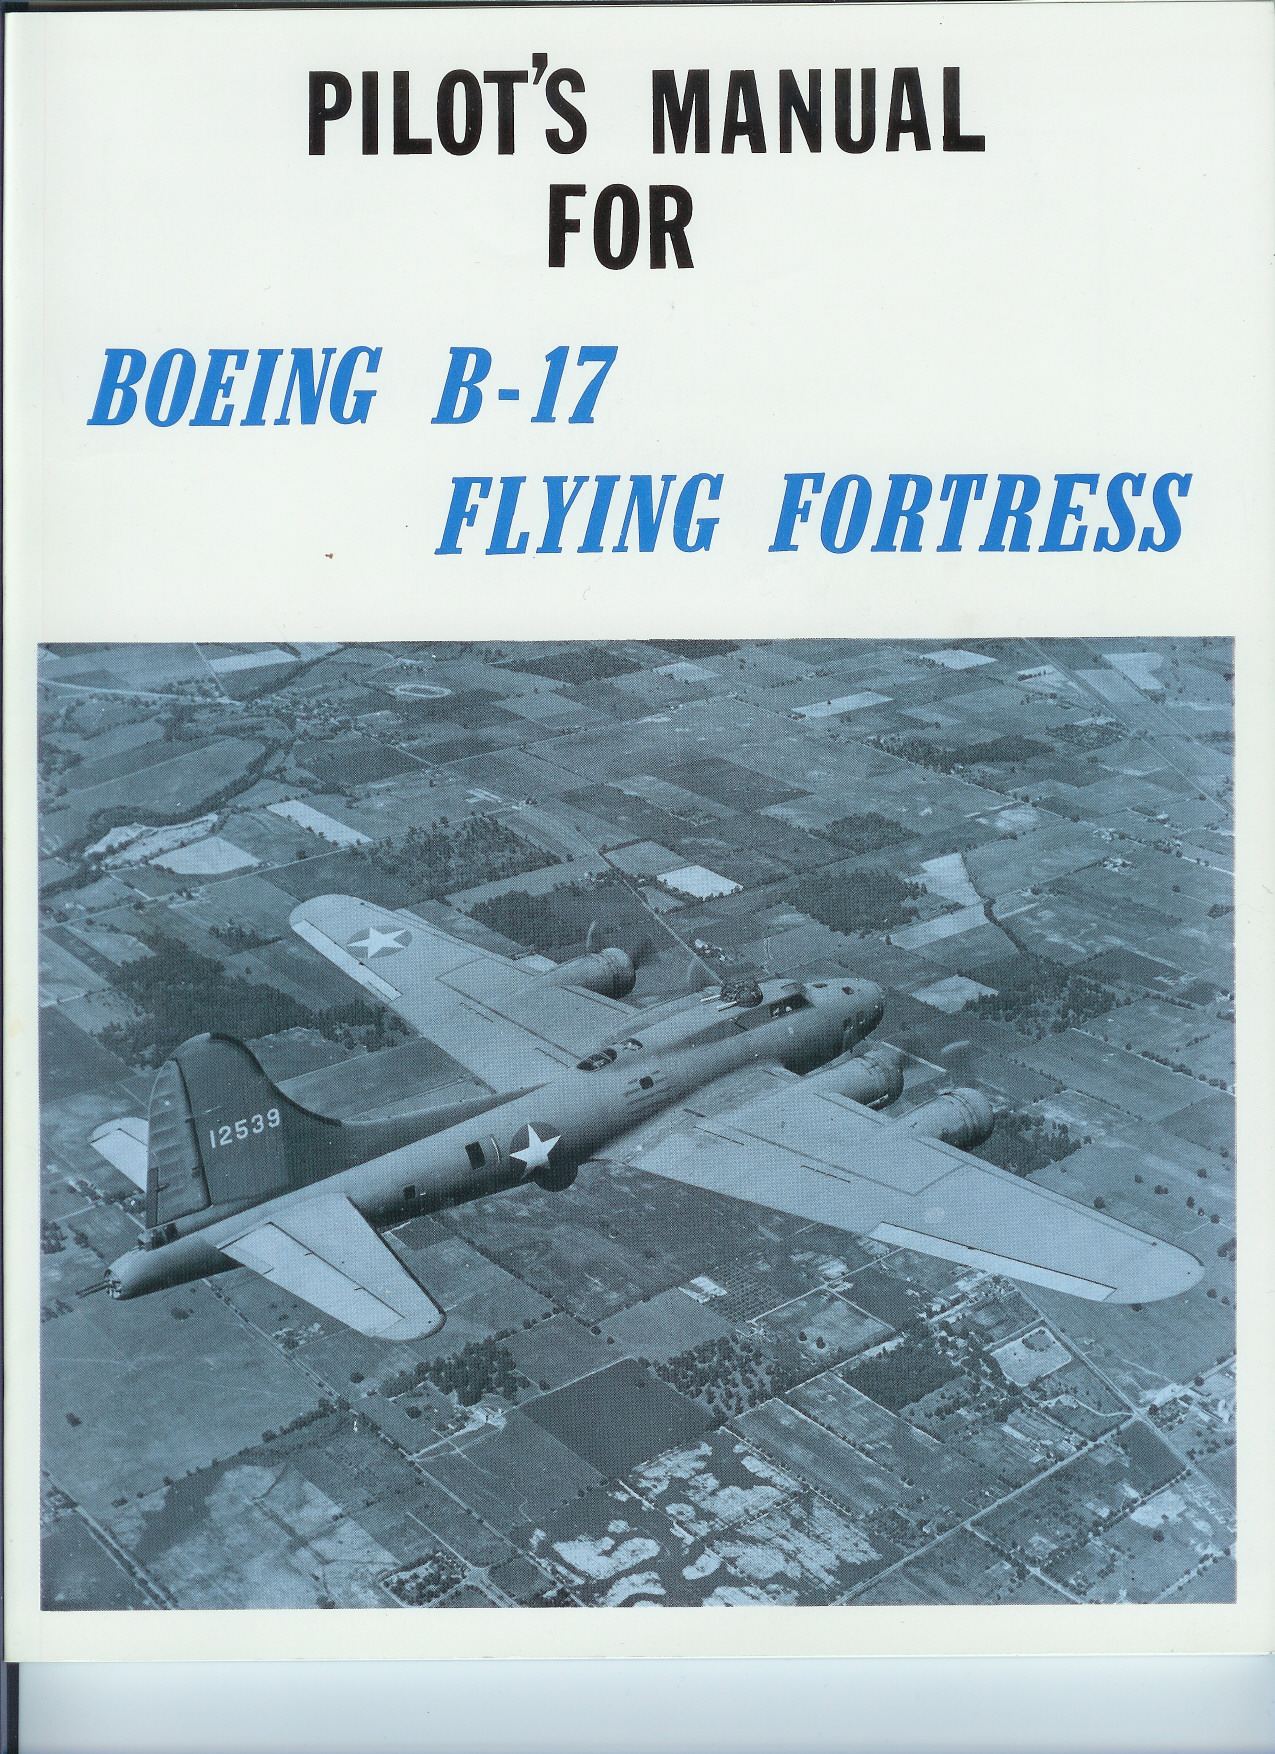 Sample page 1 from AirCorps Library document: Pilot's Manual - B-17